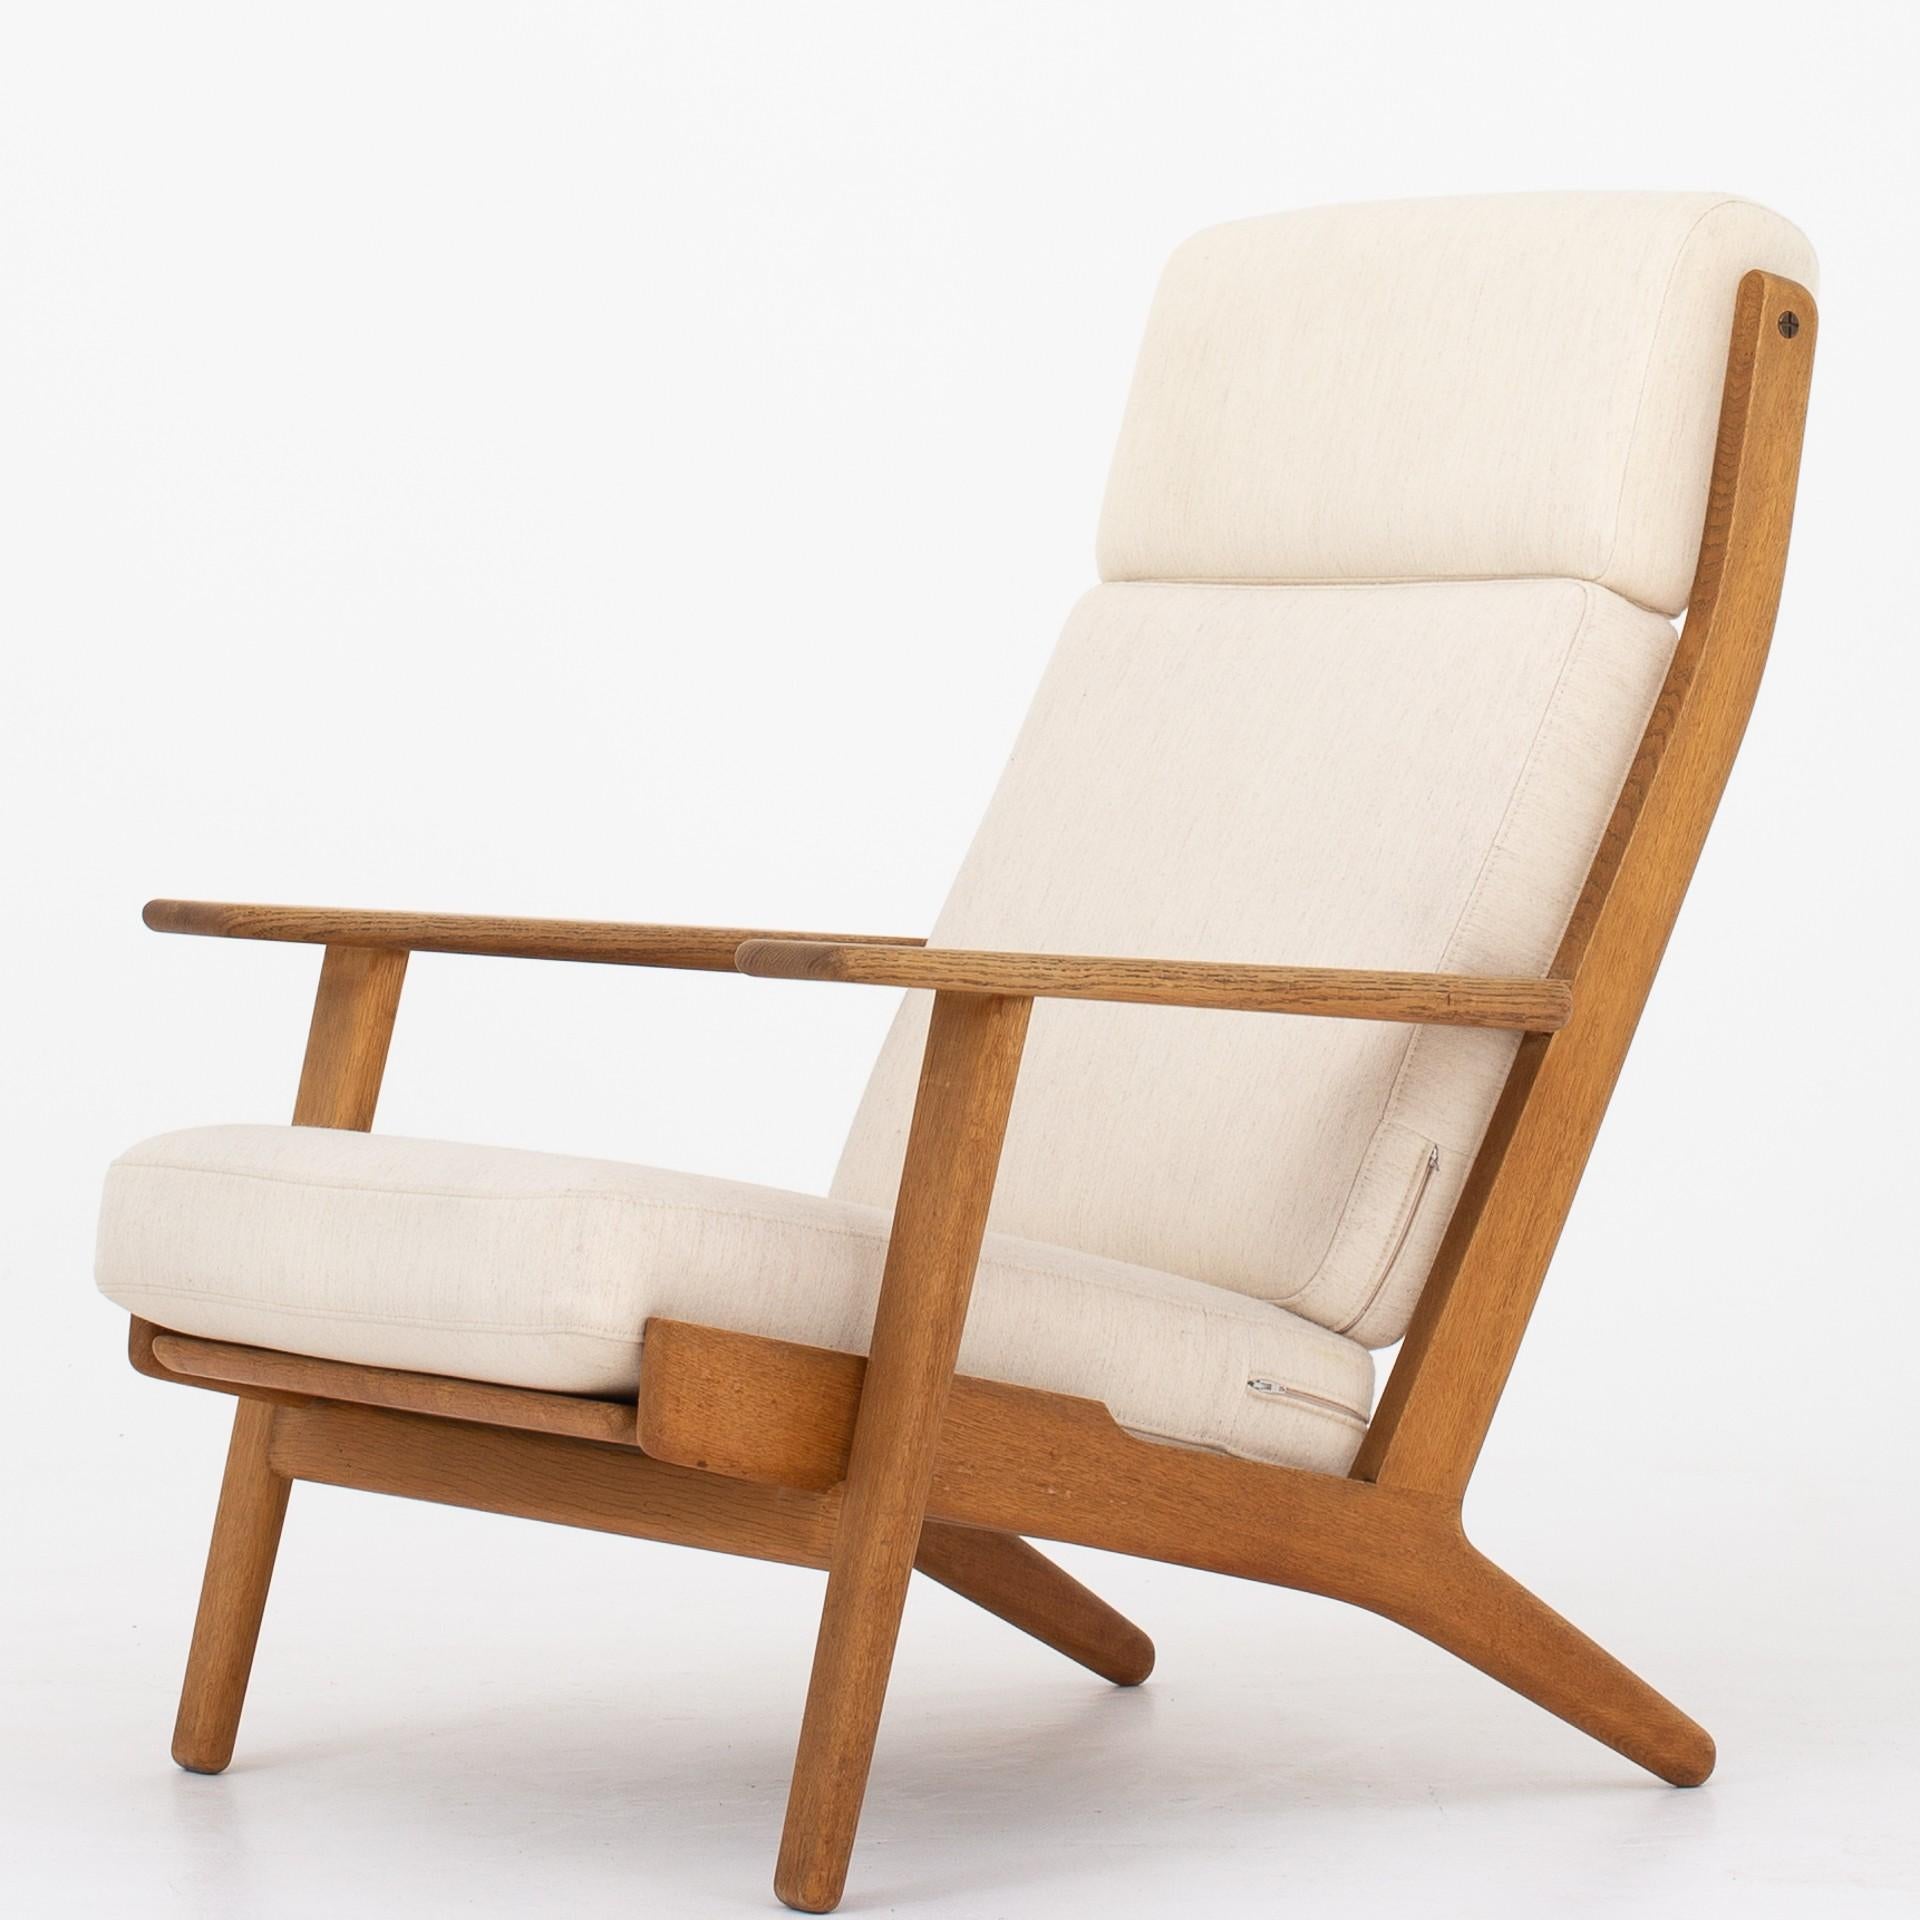 GE 290A - Easy chairs in patinated oak with original cushions in savak wool. Maker GETAMA. 1953.